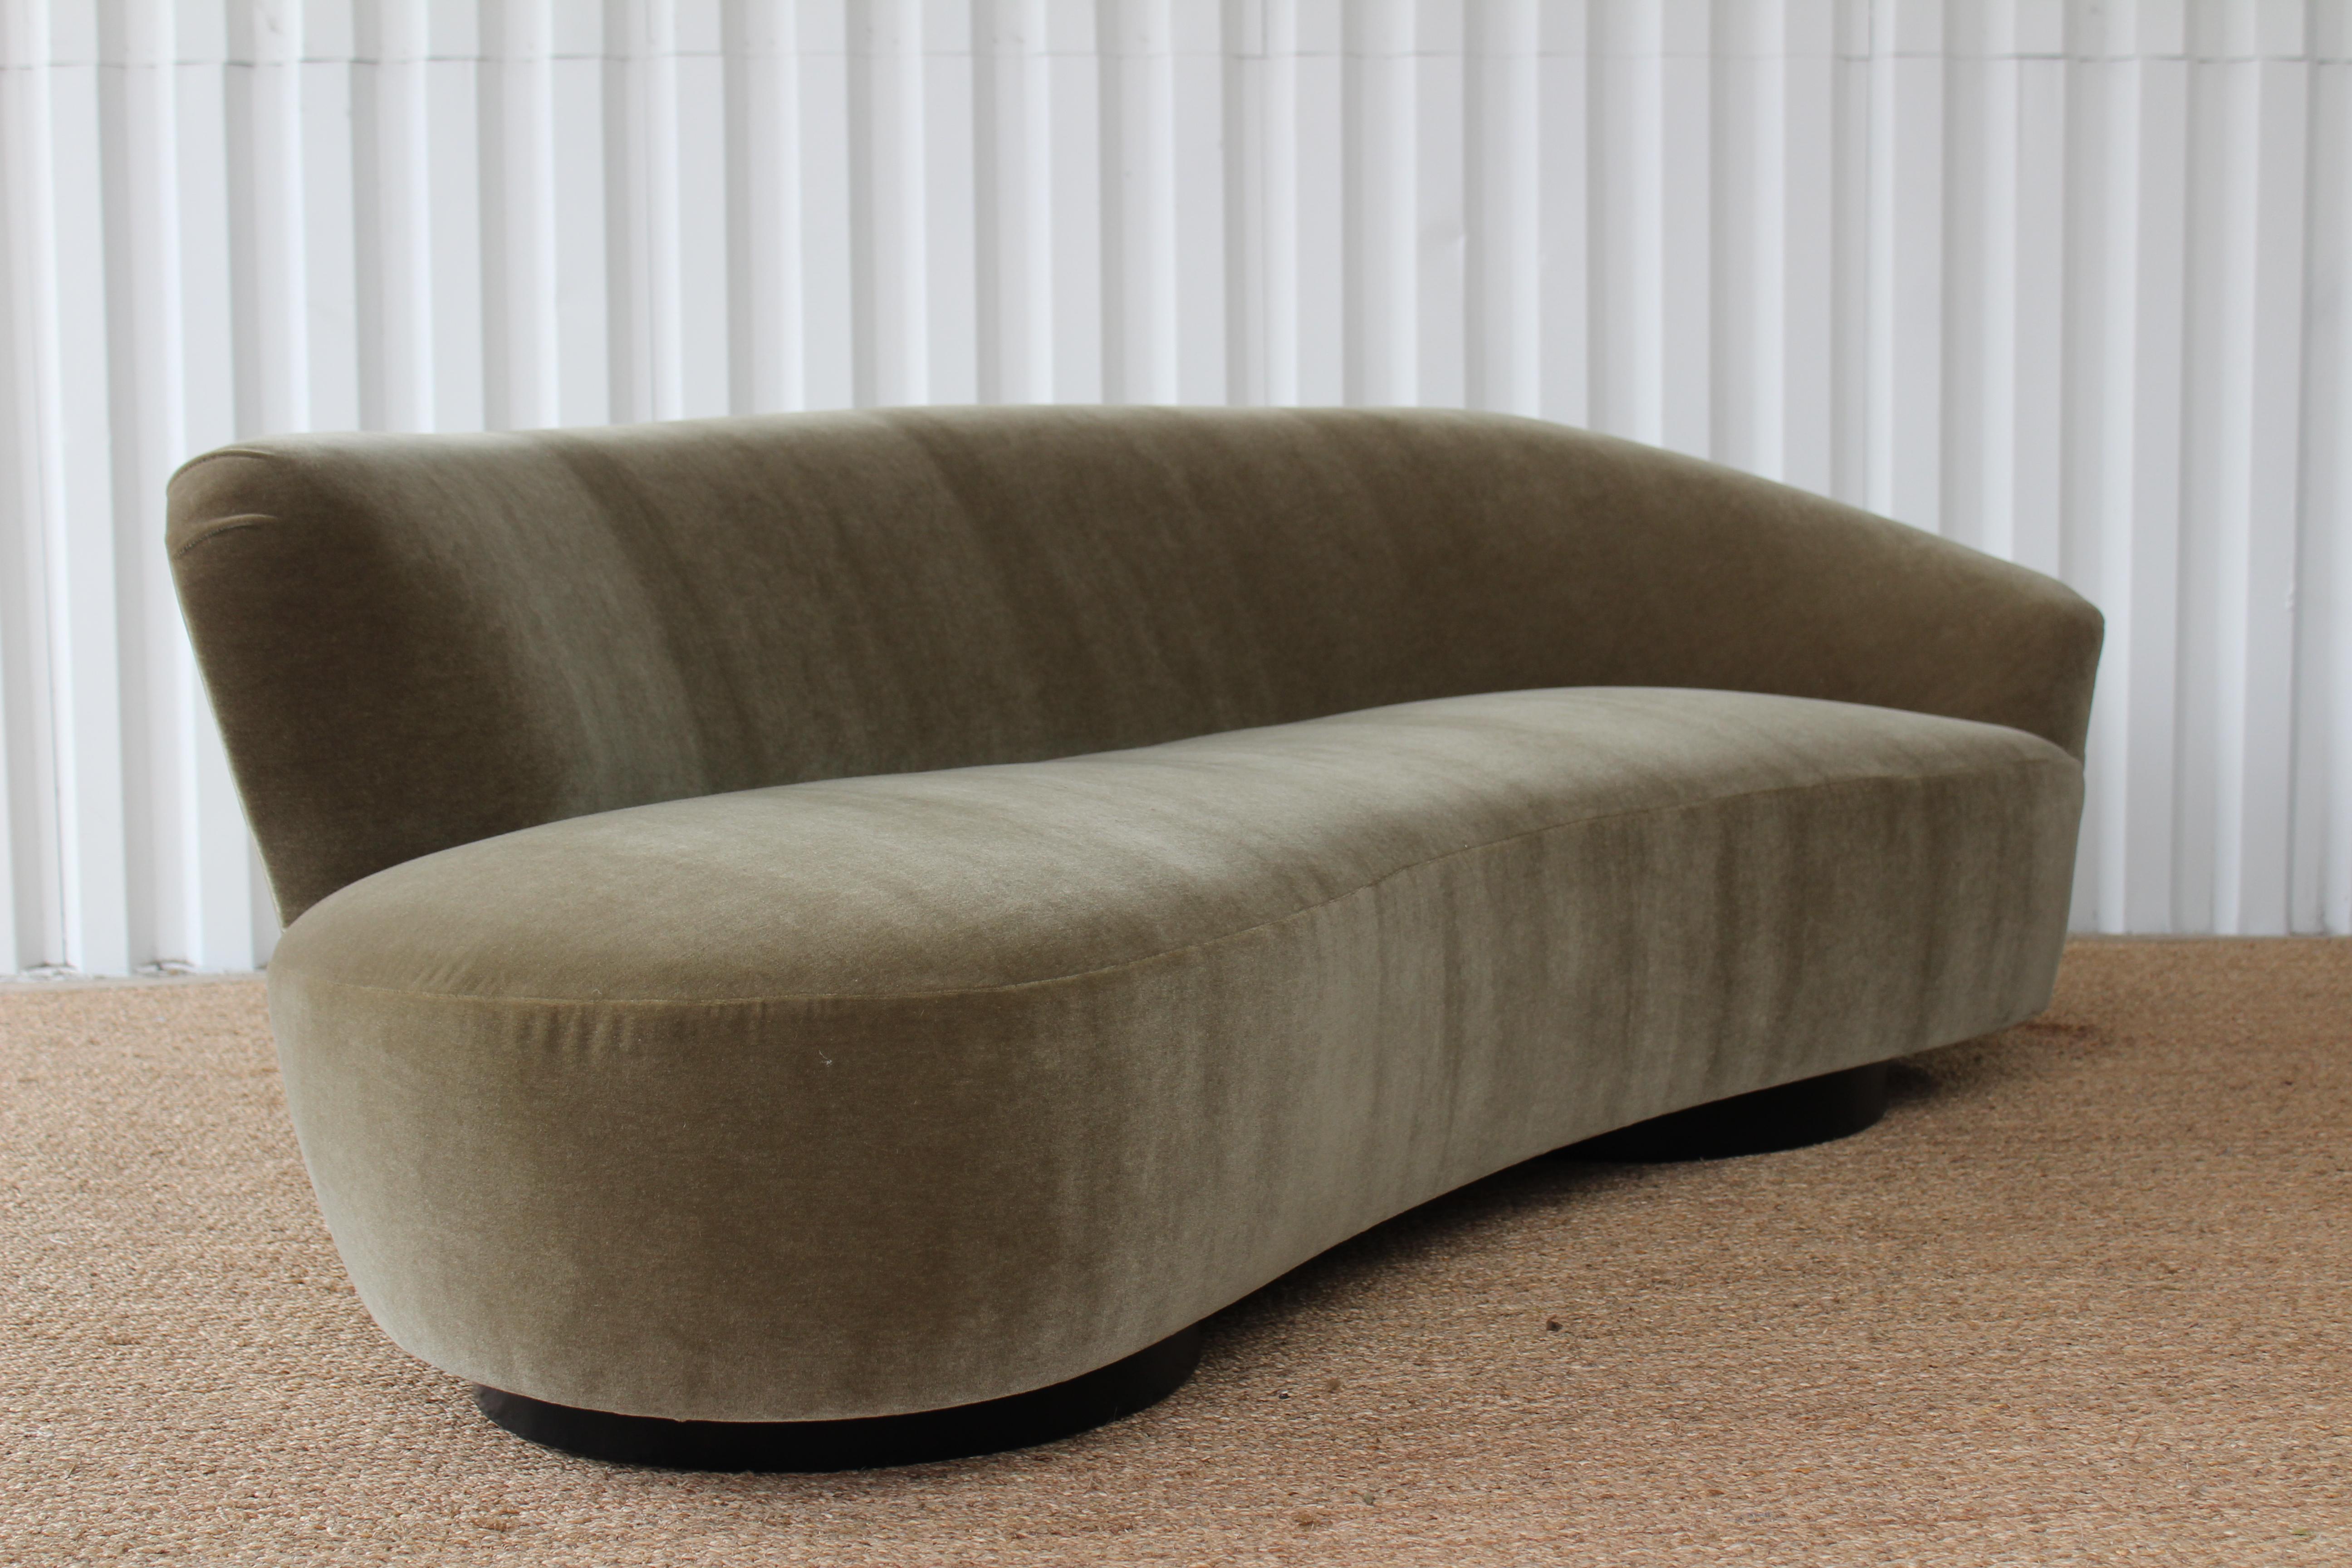 Curved sculptural sofa by Vladimir Kagan, 1970s. New olive green Italian mohair upholstery. The base is two circular walnut bases which were refinished satin black.